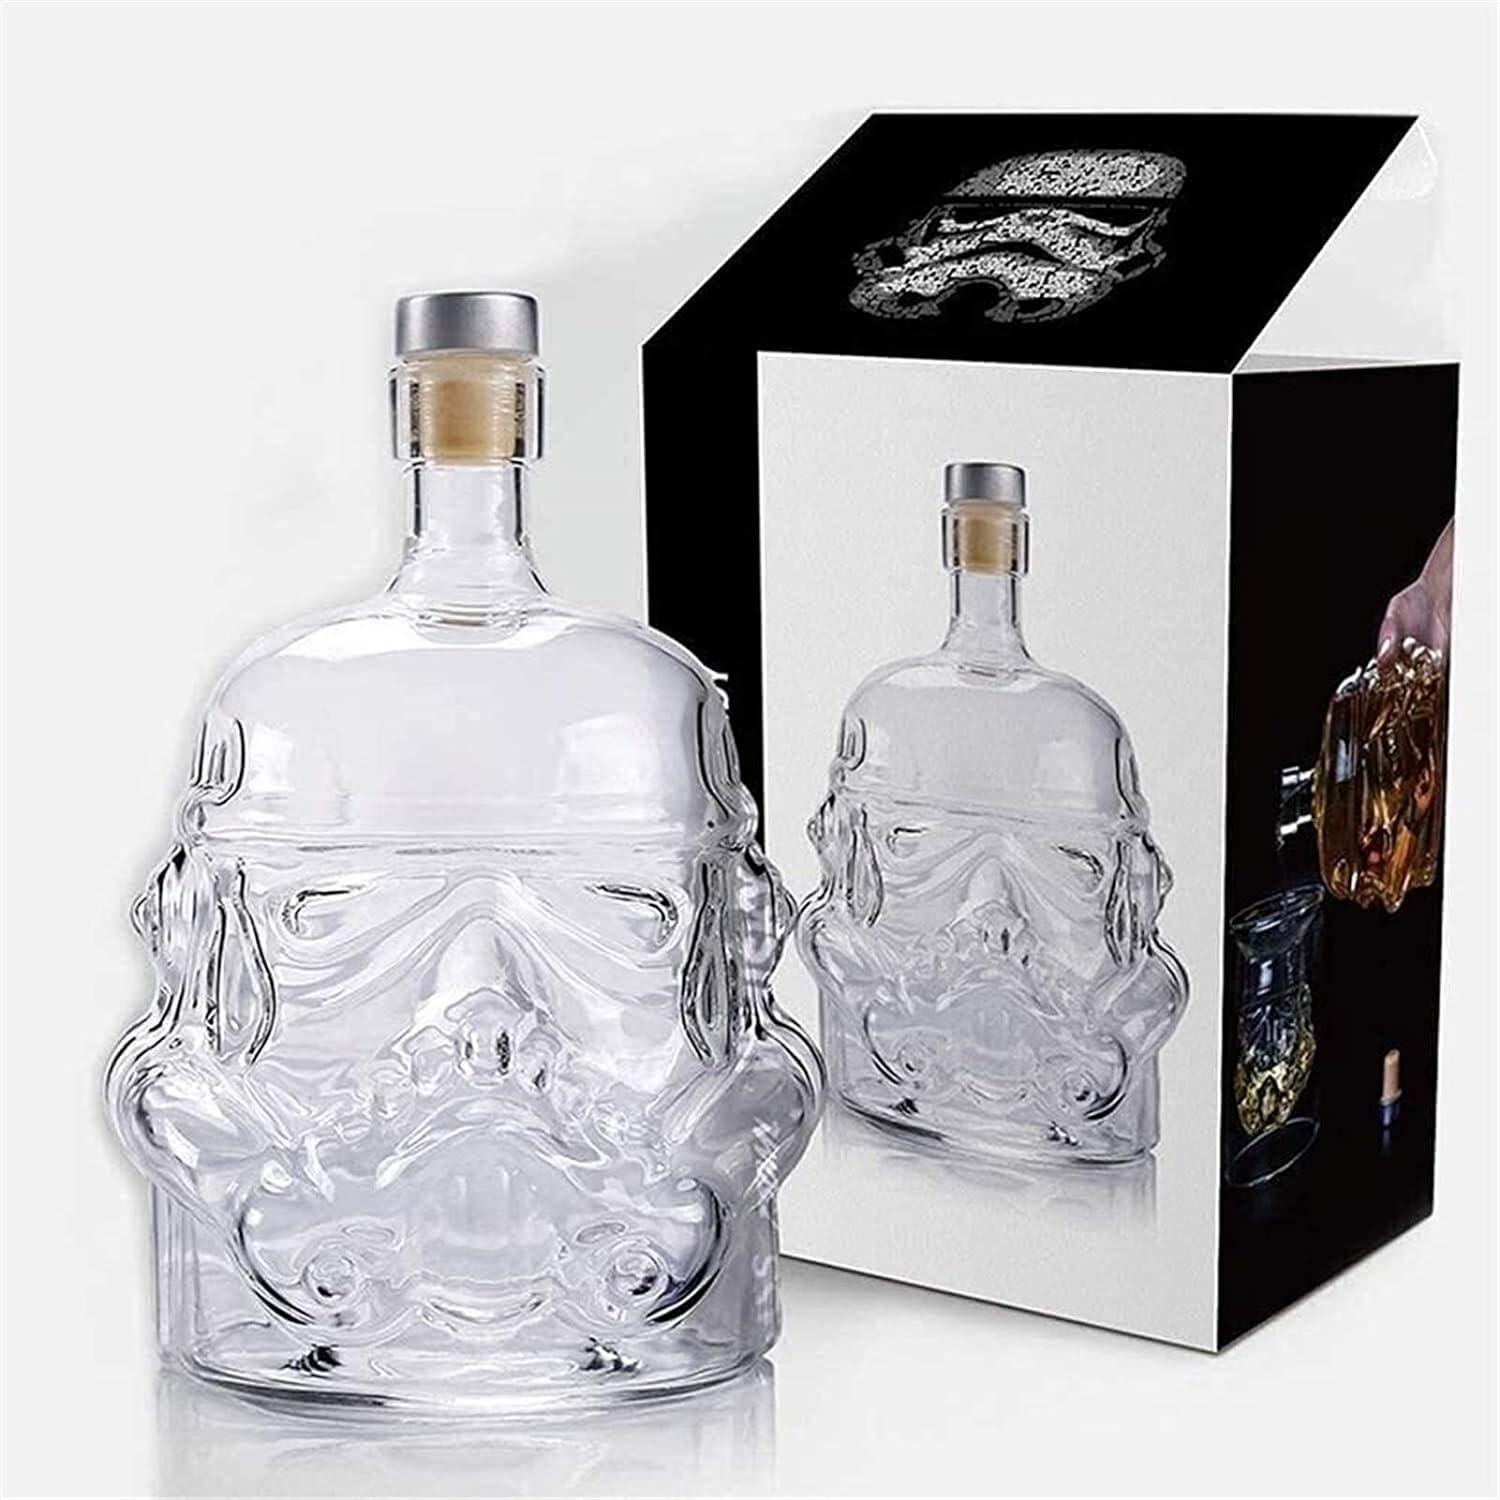 Transparent Star Wars Stormtrooper Glass Decanter Bottle with Stopper & Tumbler Cup - Home Inspired Gifts